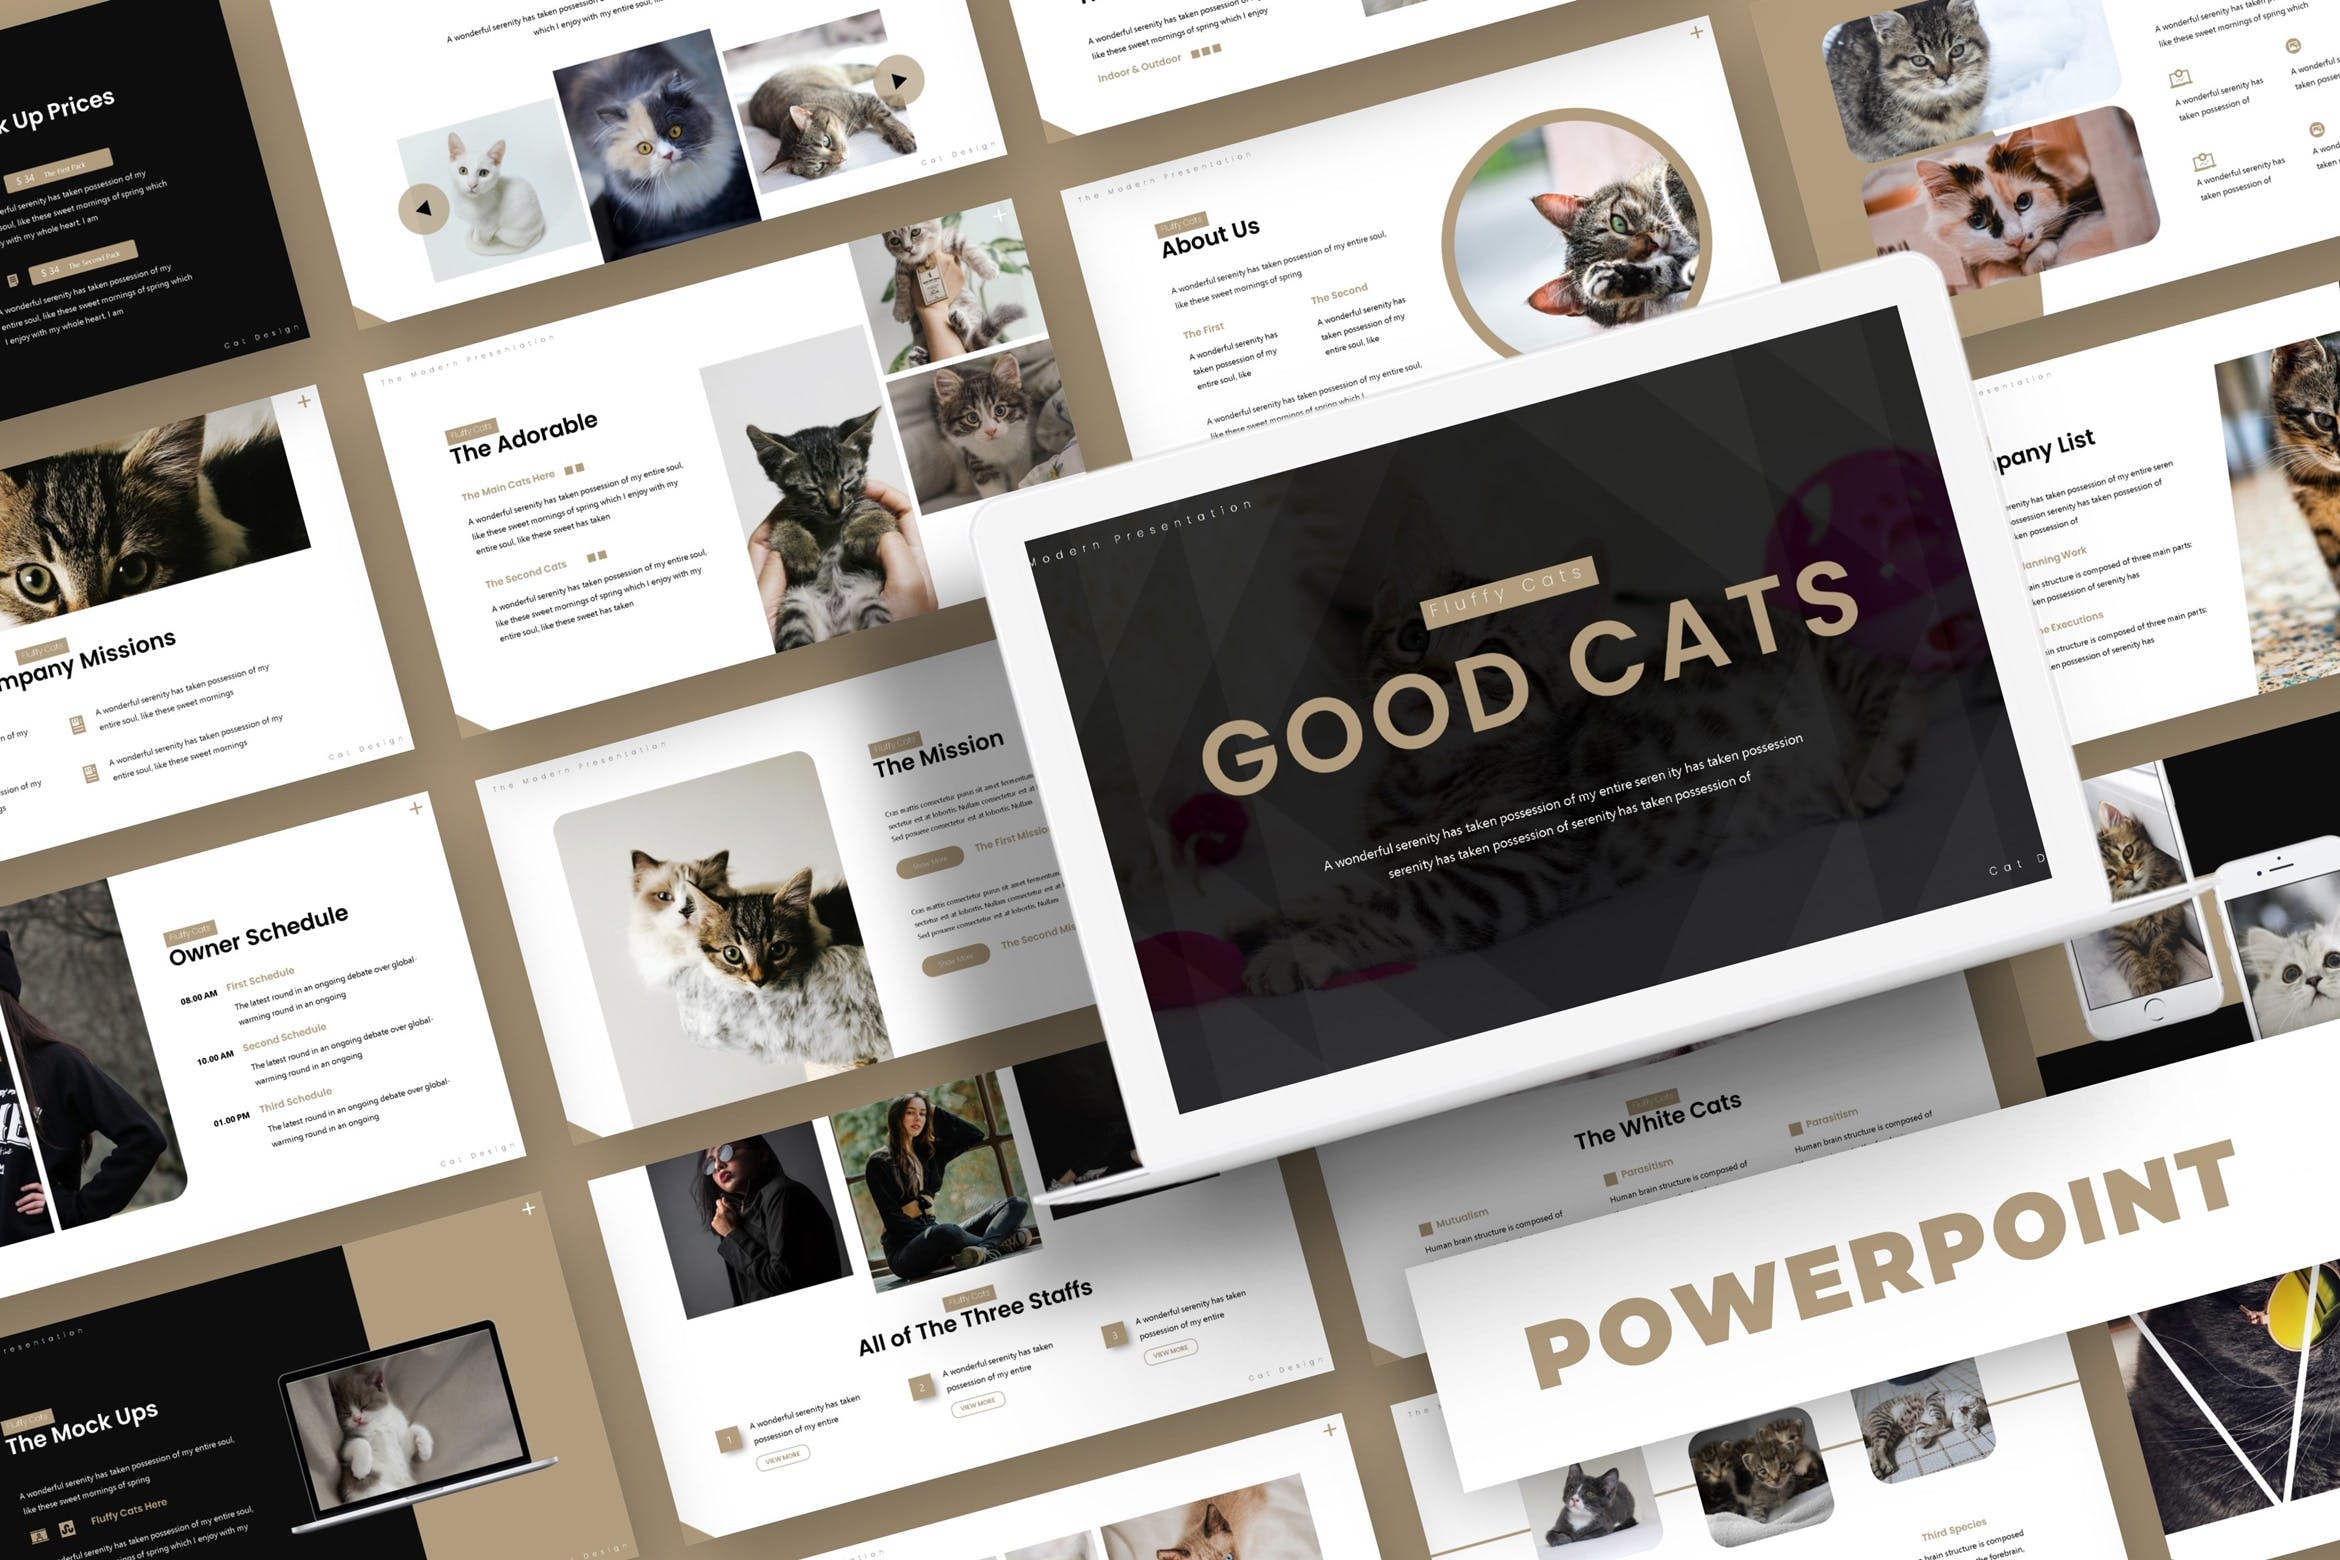 Cover image of Good Cat- Powerpoint Template.